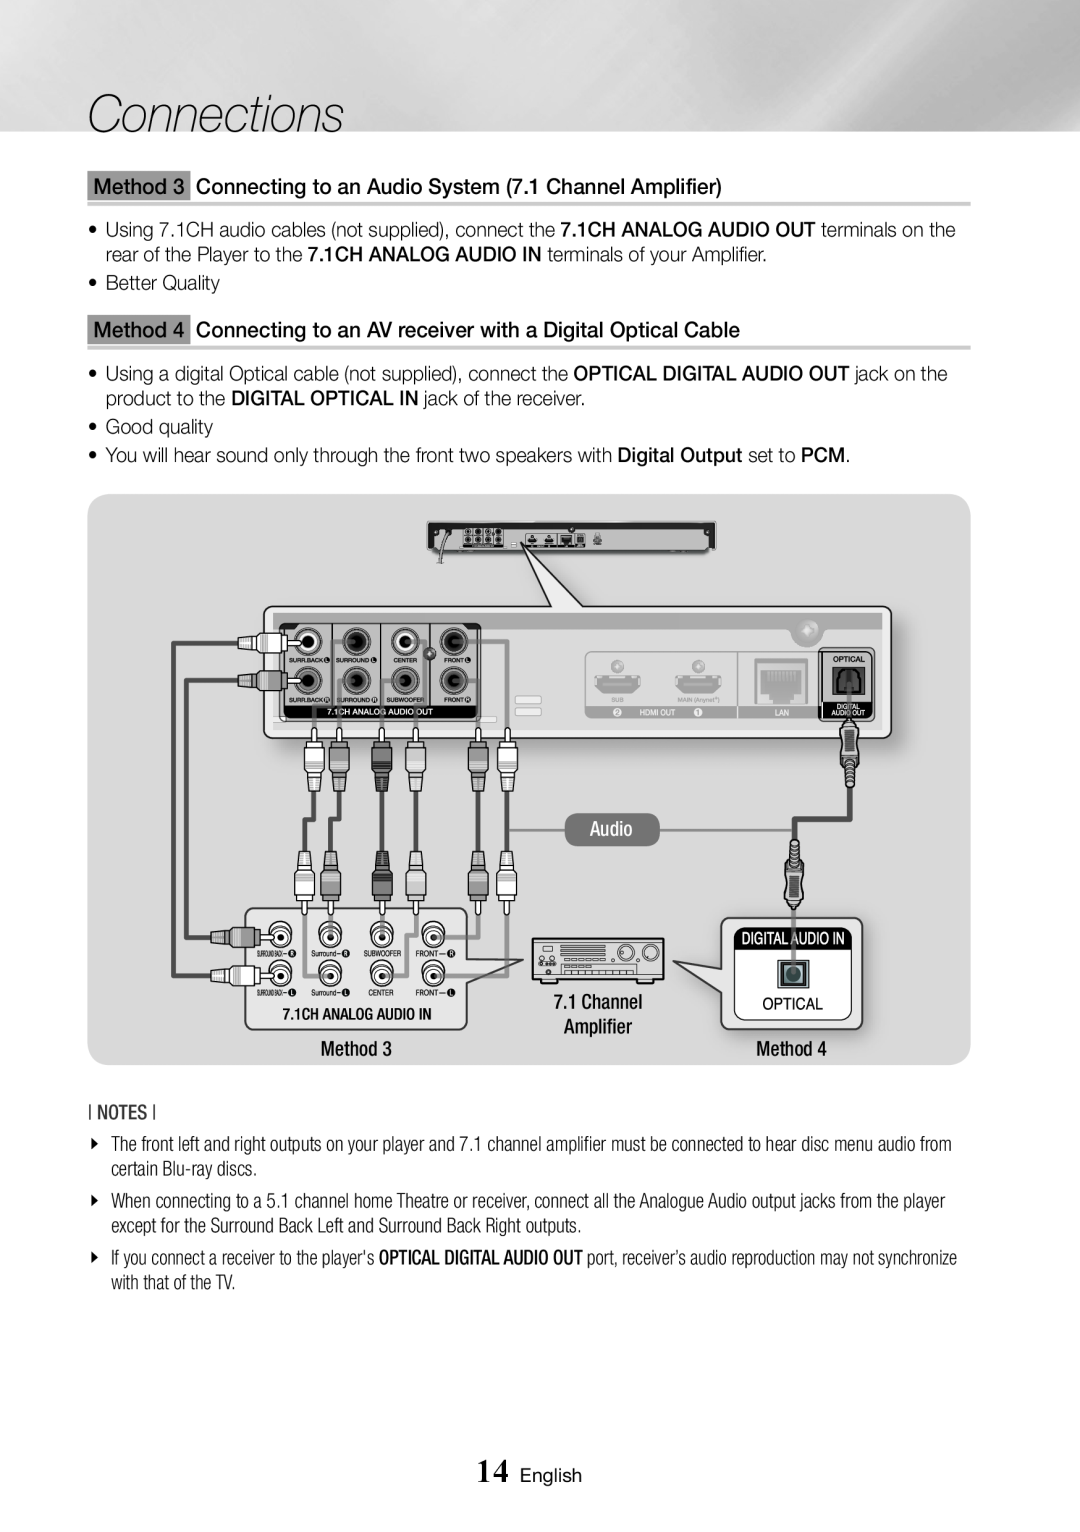 Samsung BD-J7500/EN manual Connections, Method 3 Connecting to an Audio System 7.1 Channel Amplifier 